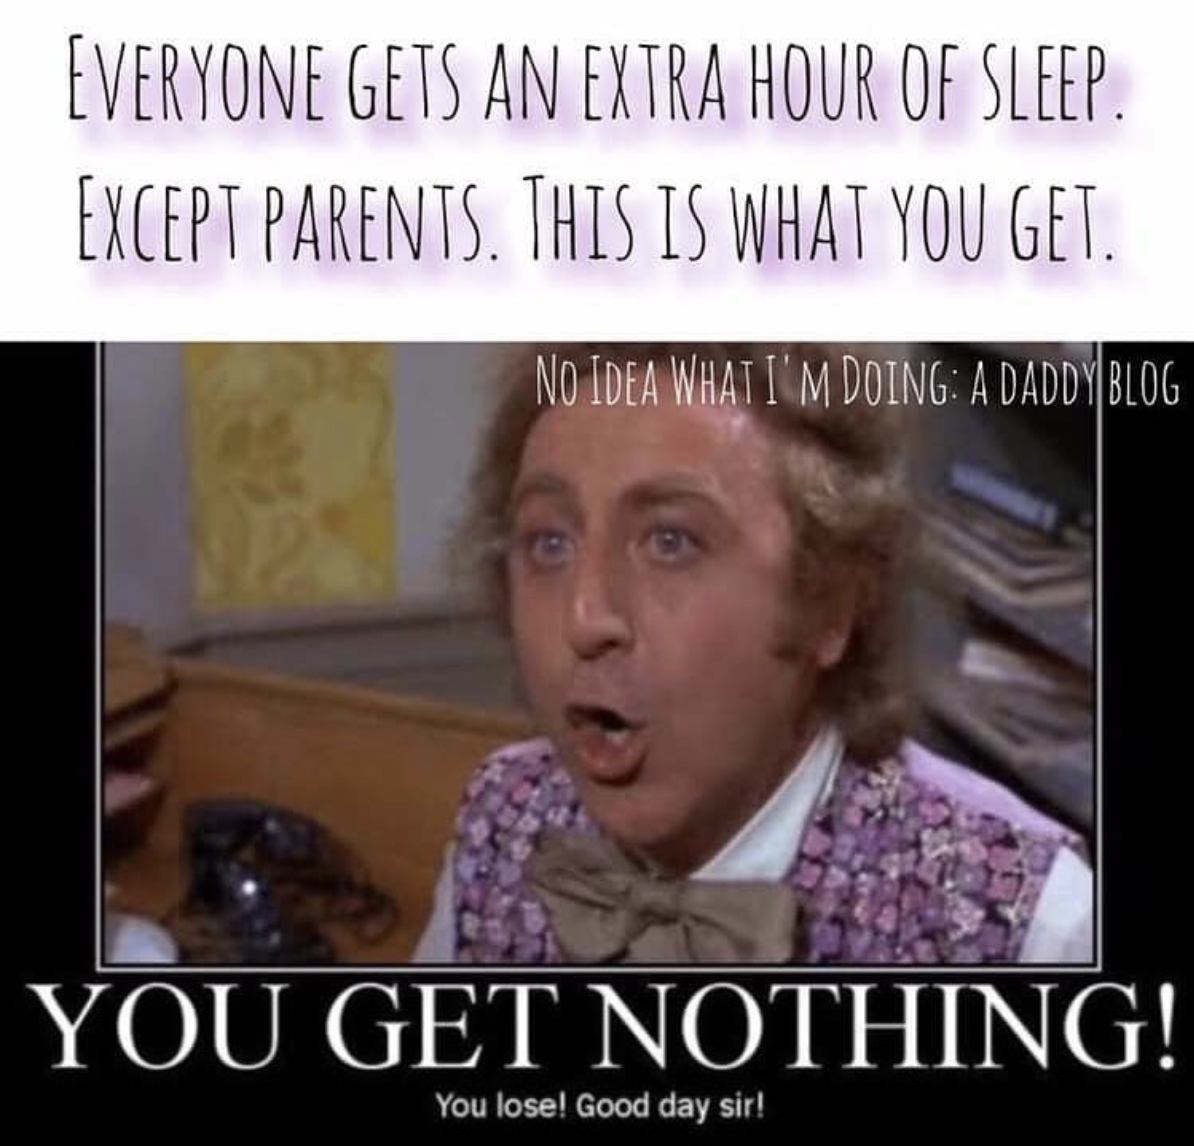 Picture of Willy Wonka (the original, Gene Wilder) in his office. 

Caption: “Everyone gets an extra hour of sleep. Except parents. This is what you get. You get Nothing! You lose! Good day sir!”